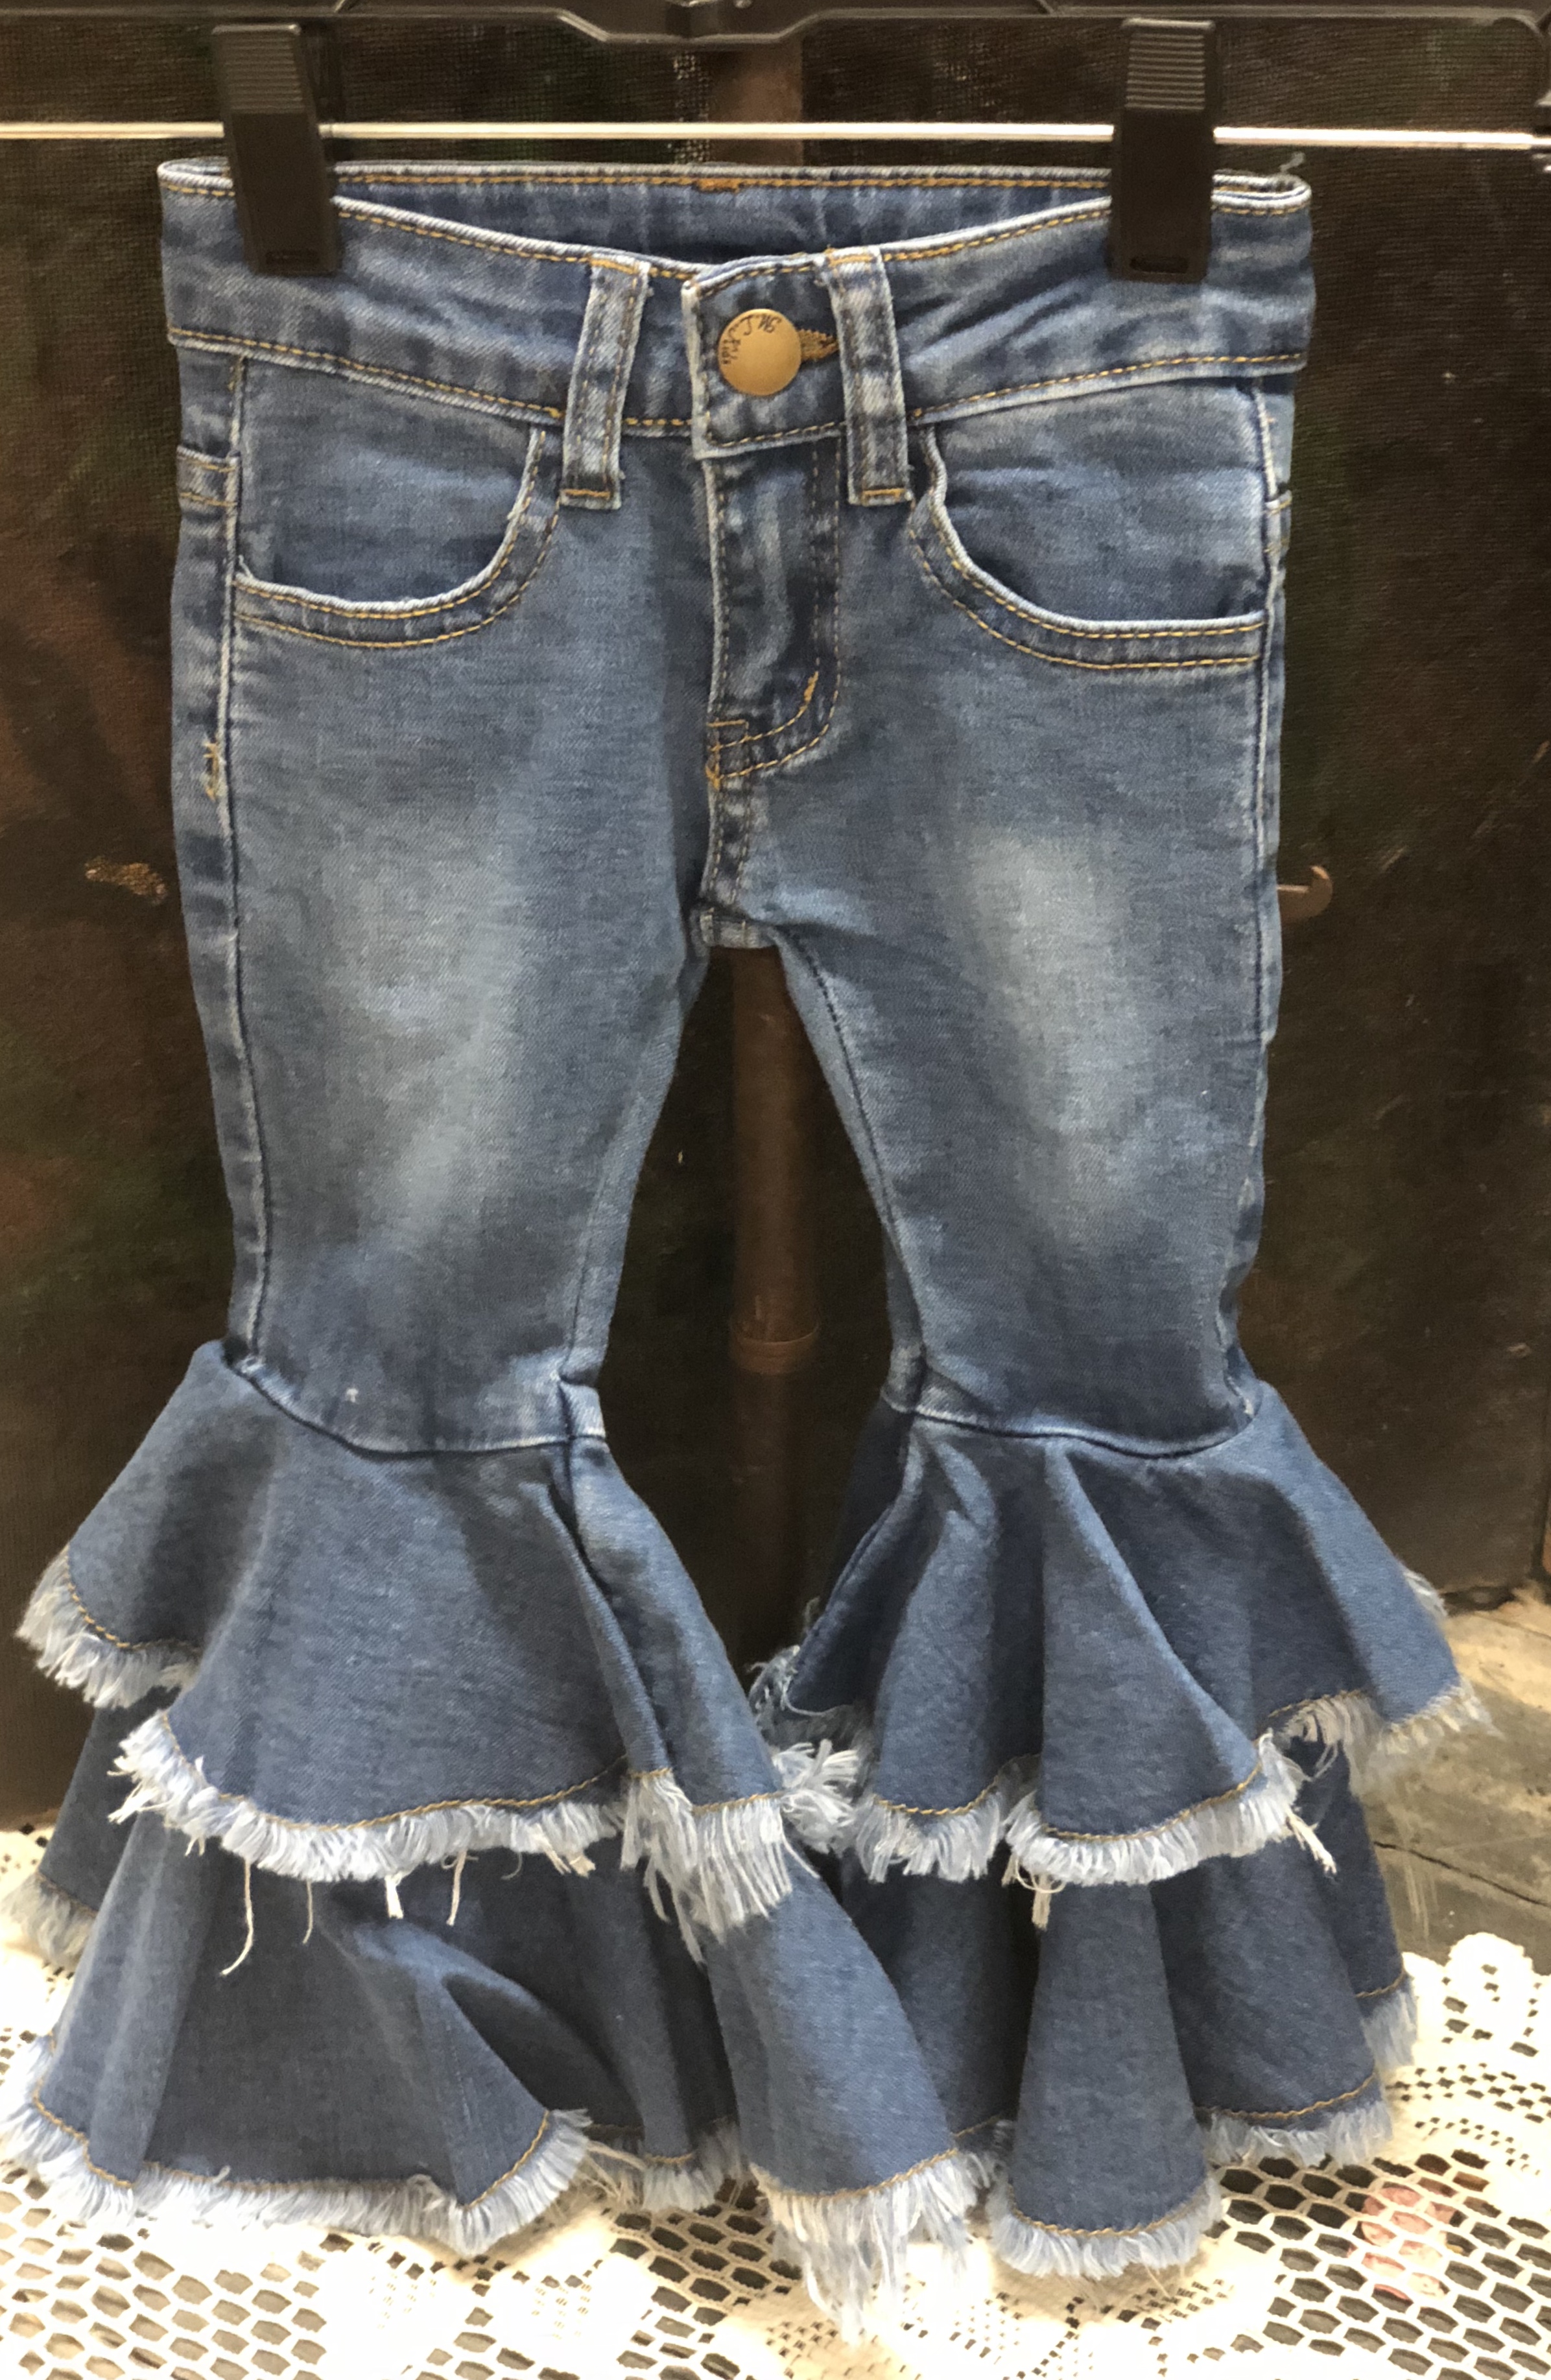 https://hoffmanhouseboutique.com/images/products/ml_kids_double_ruffle_bell_bottom_jeans___fp0012_light___size_6m.jpg